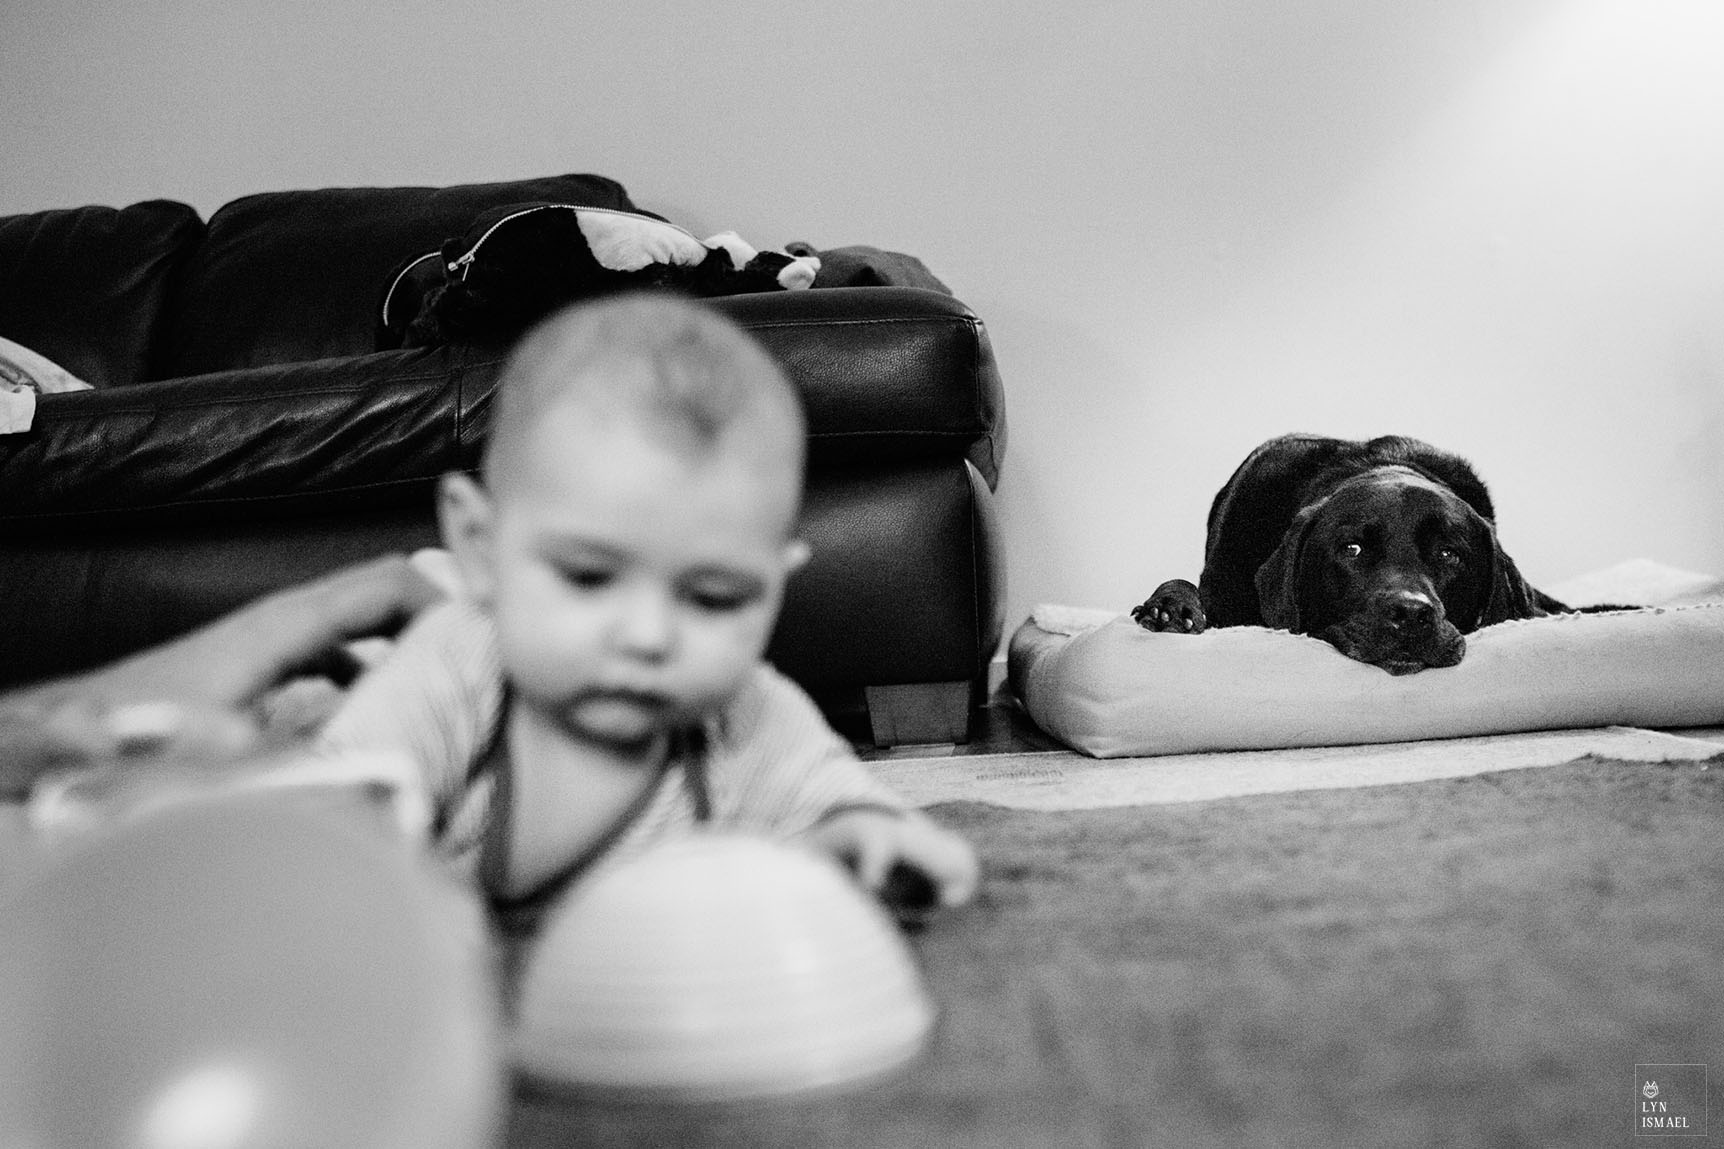 A black lab observes a human baby during a Day In The Life Session in Kitchener, Ontario.